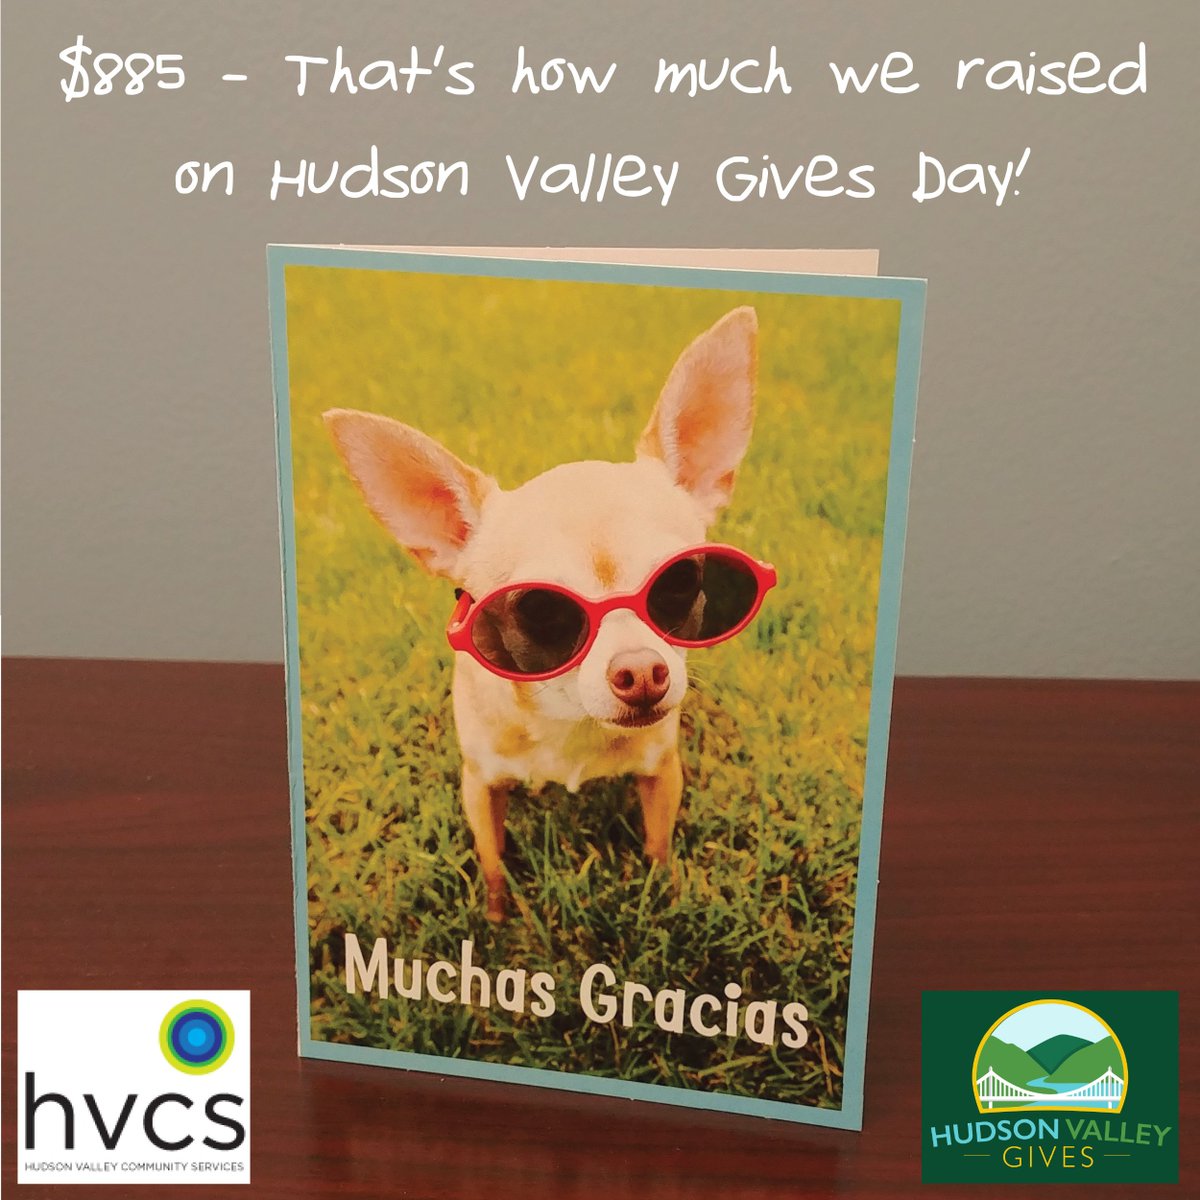 Thanks again to all those who helped us raise $885 in yesterday's #HVGives! Yes to more resources for people living with chronic illnesses.